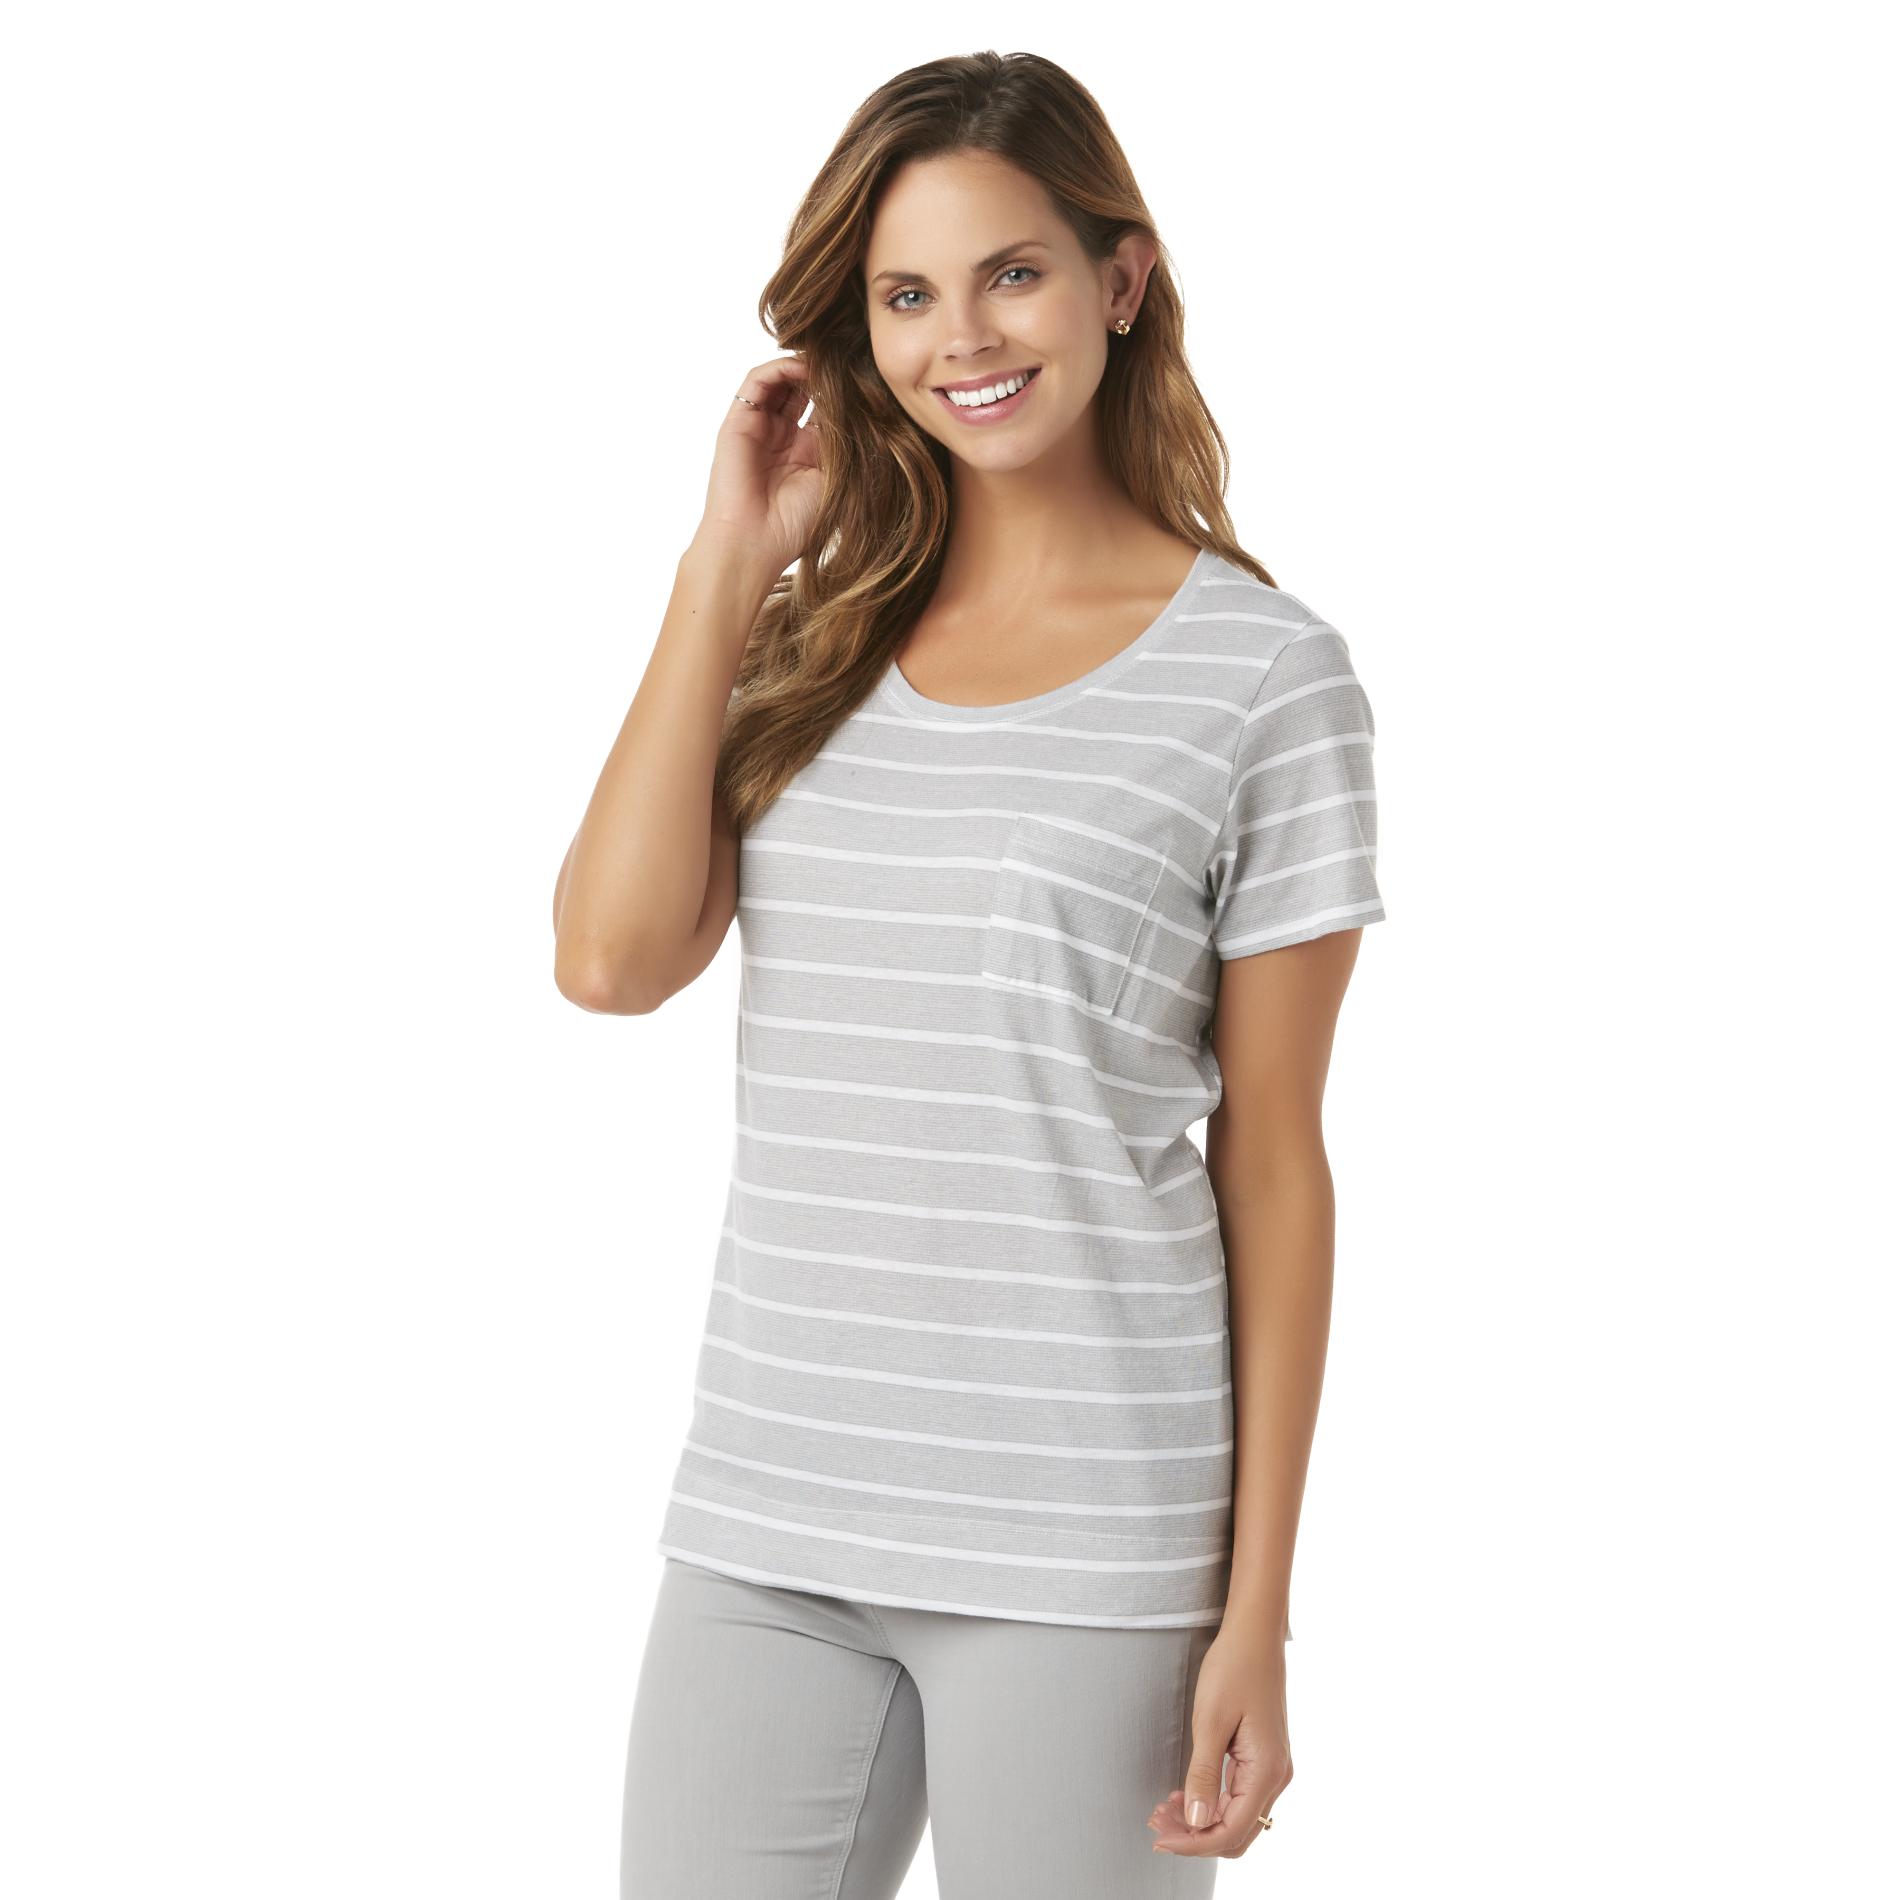 Simply Styled Women's Pocket T-Shirt - Striped